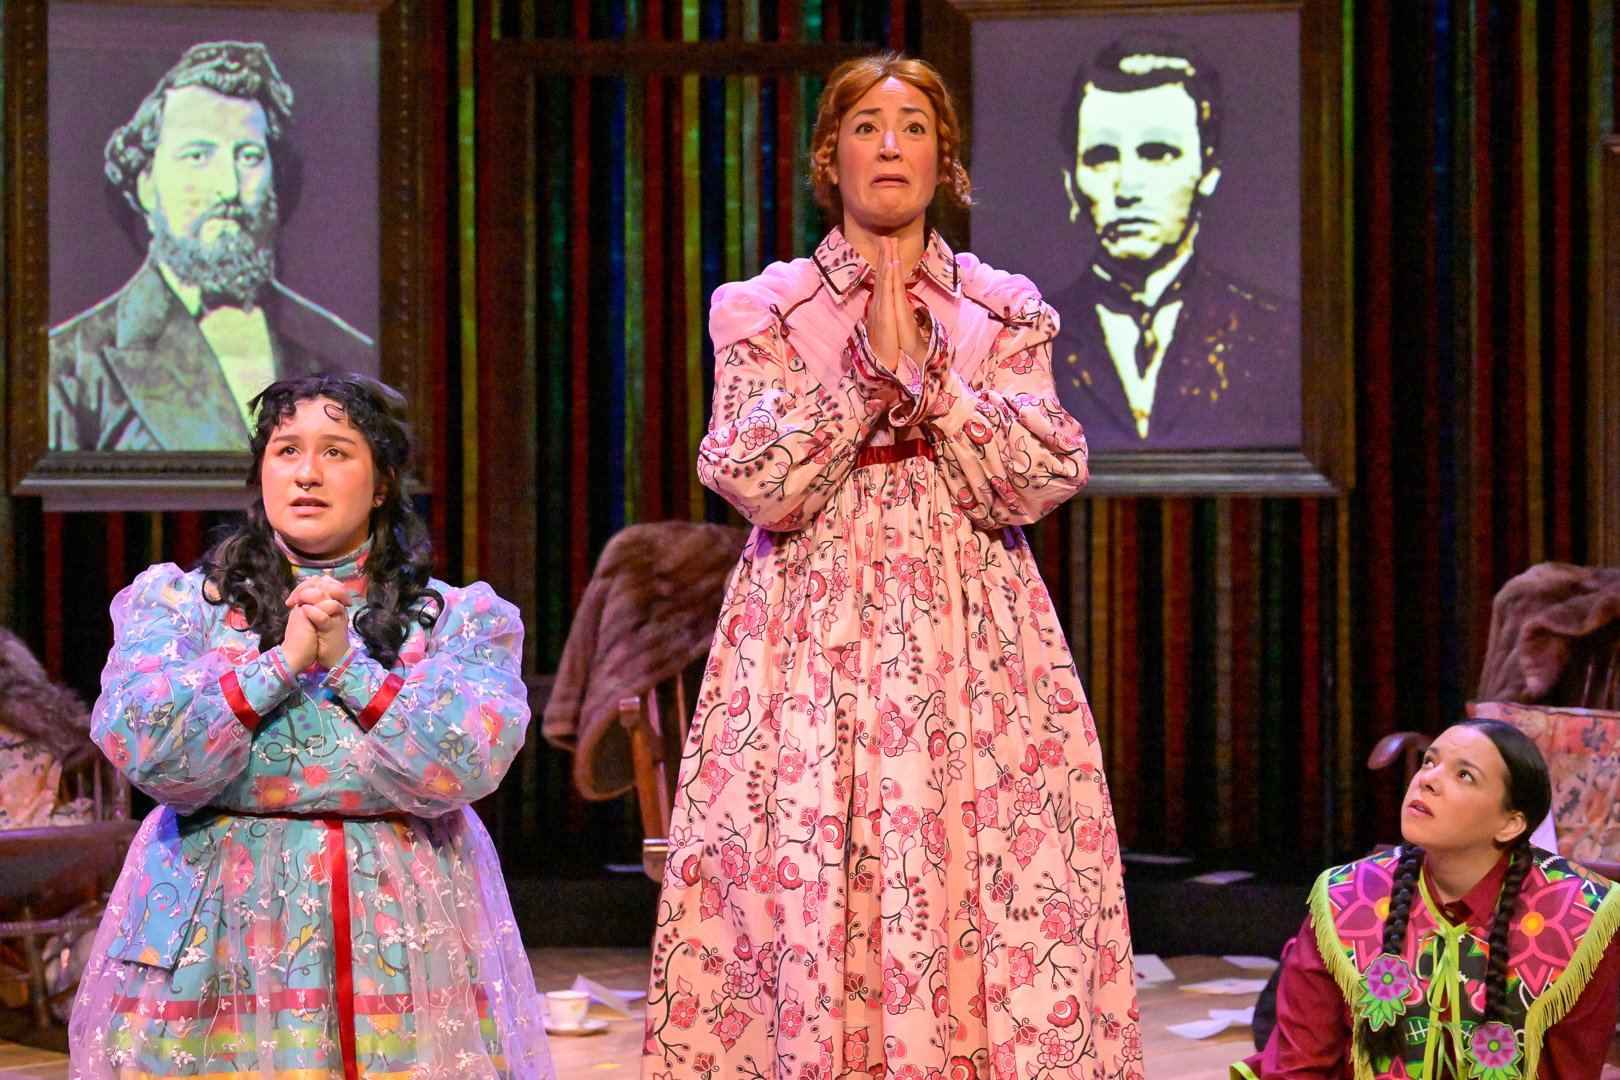  Kelsey Wavey, Cheri Maracle, and Lisa Nasson in "Women of the Fur Trade" by Frances Končan. Photo by Fred Cattroll.